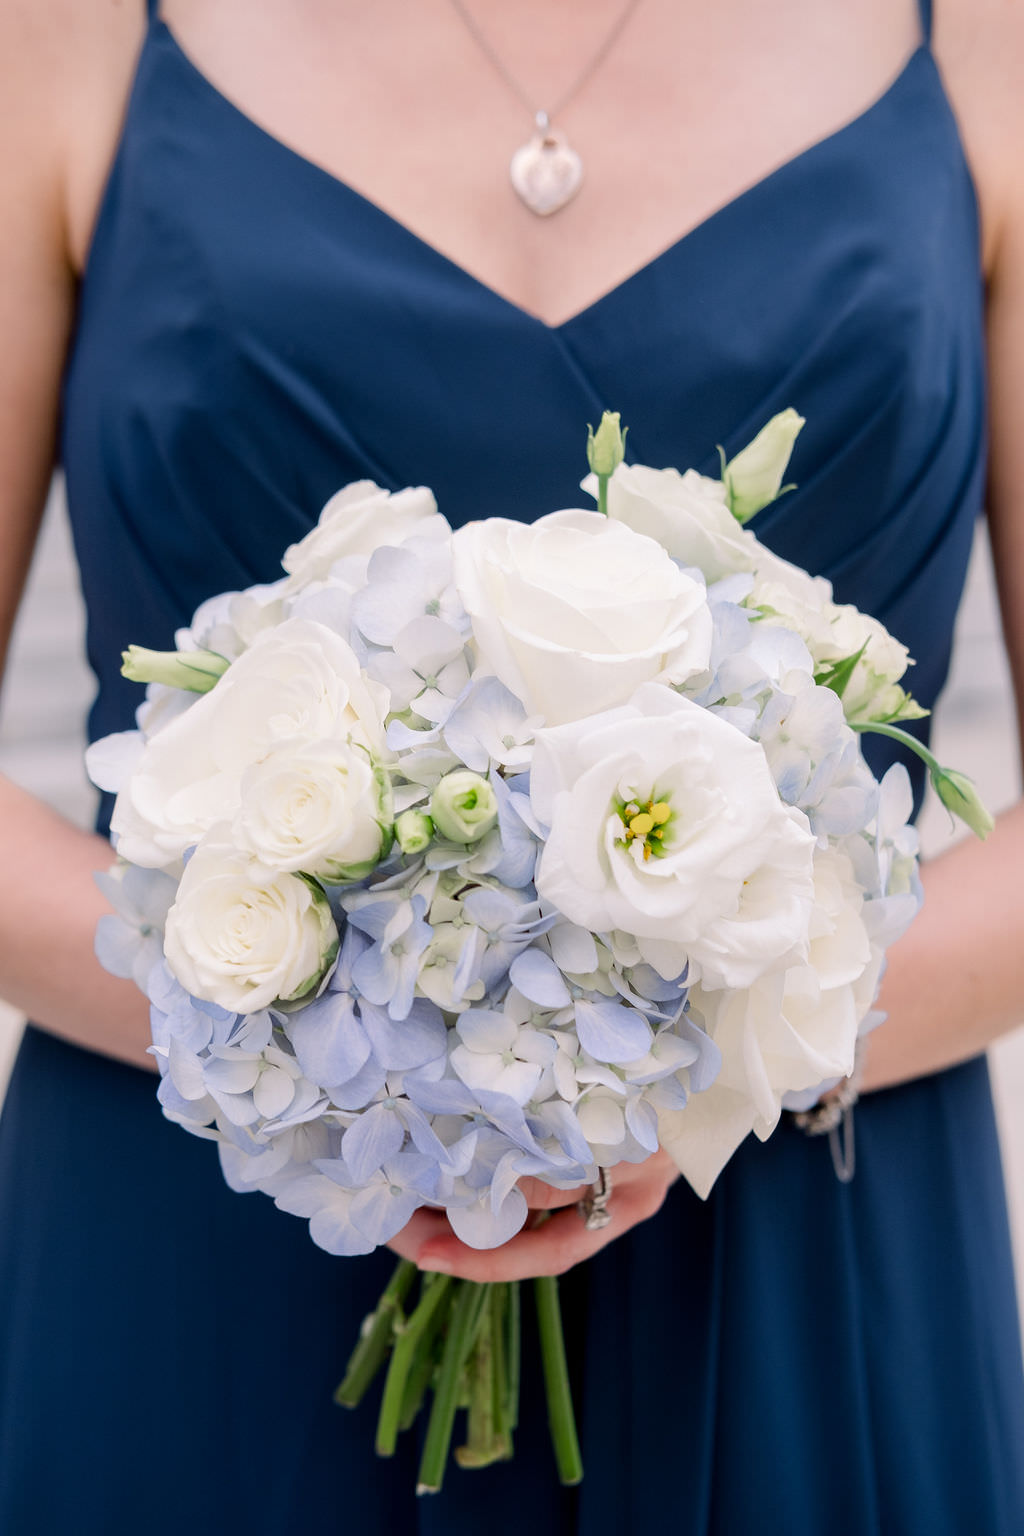 Tampa Bay Bridesmaid in Navy Blue Dress with White, Ivory, Pale Blue Floral Bouquet | Tampa Wedding Planner Breezin Entertainment